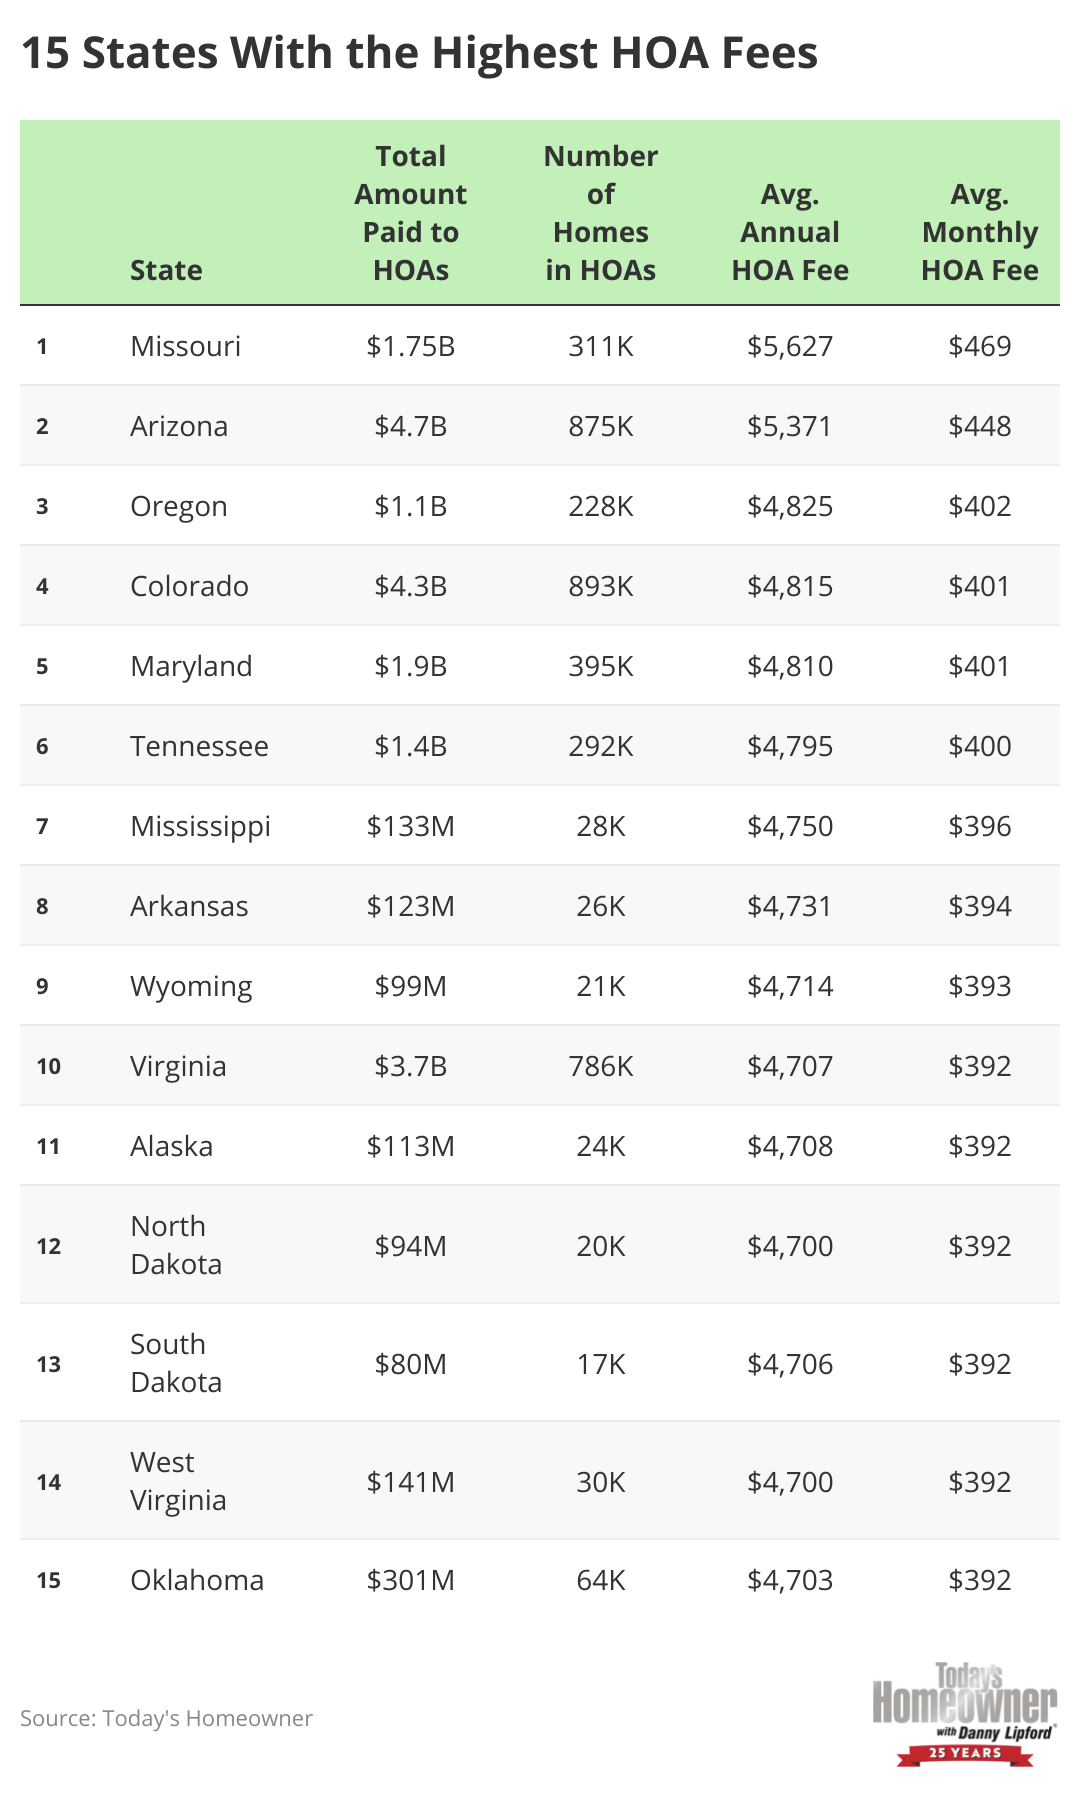 A list of states where the average HOA fees are highest.